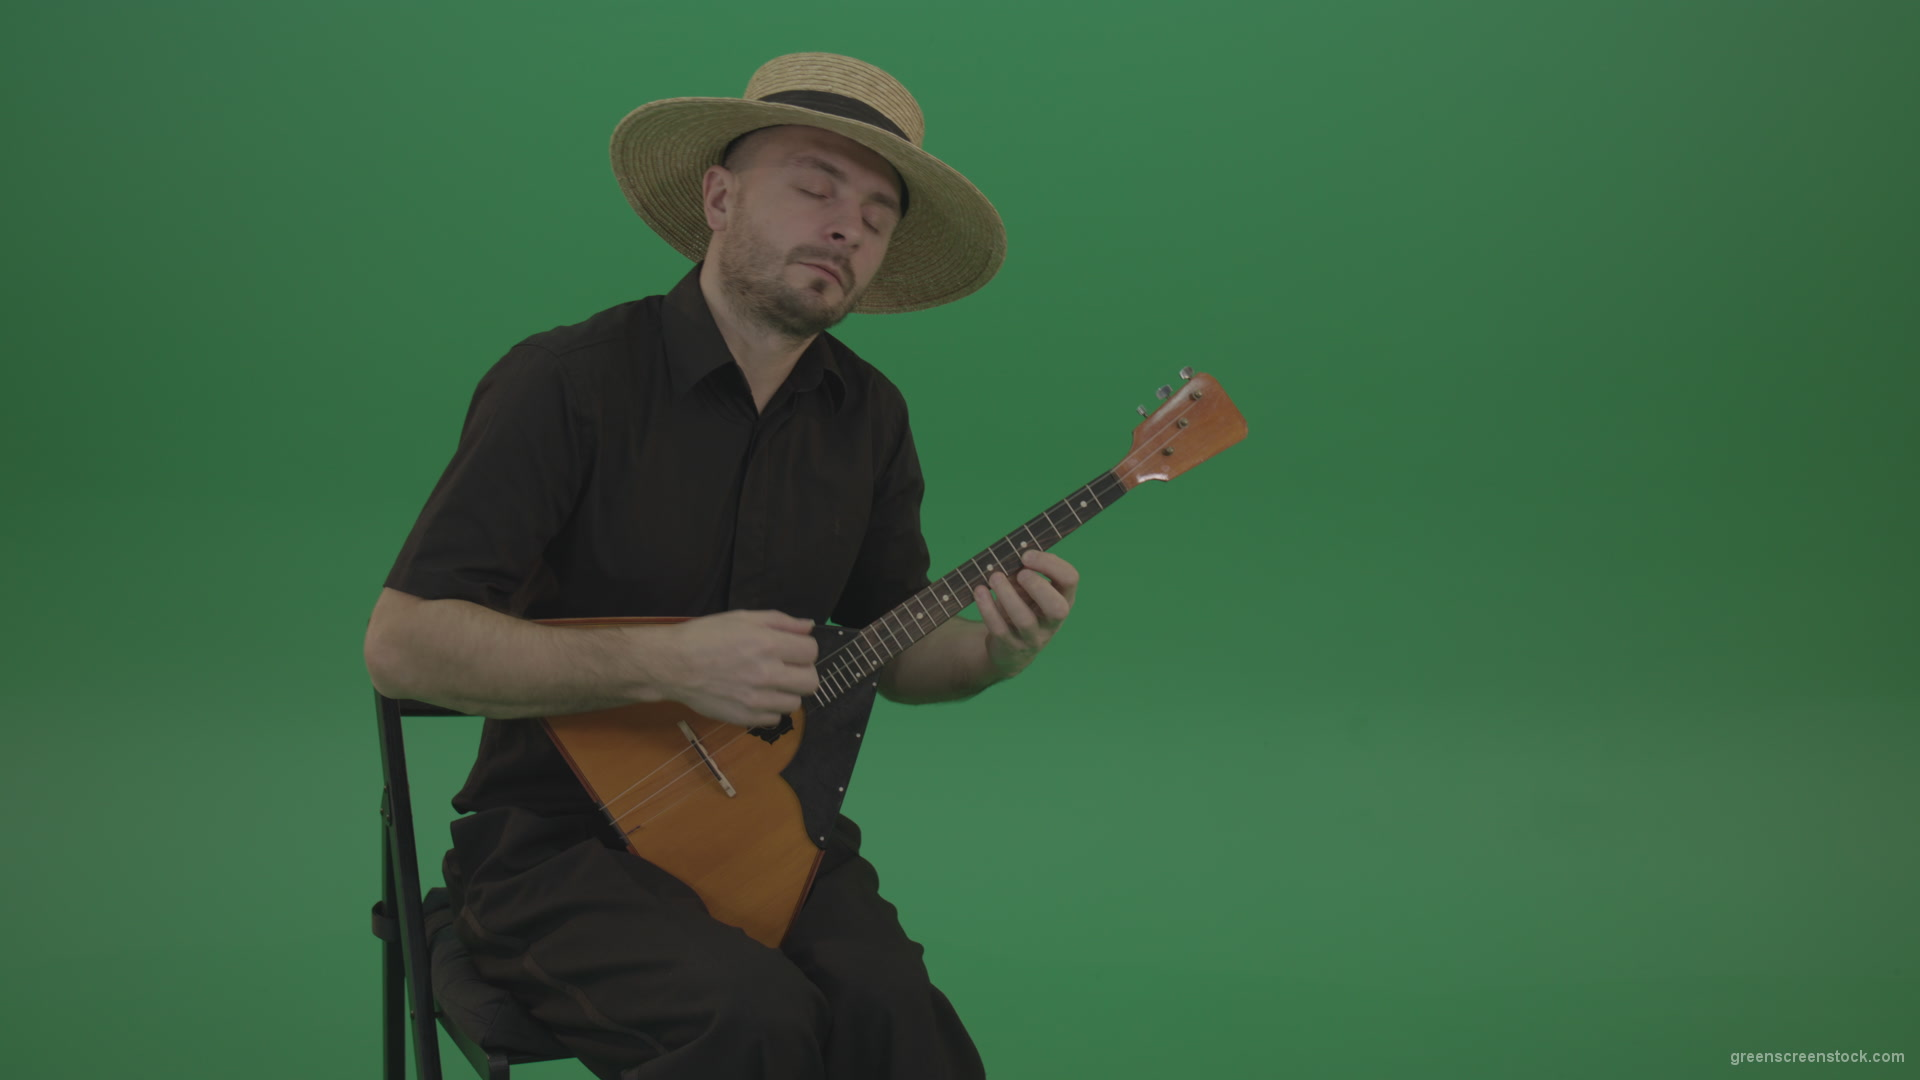 Man-from-village-play-Balalaika-music-instrument-isolated-on-green-screen_004 Green Screen Stock